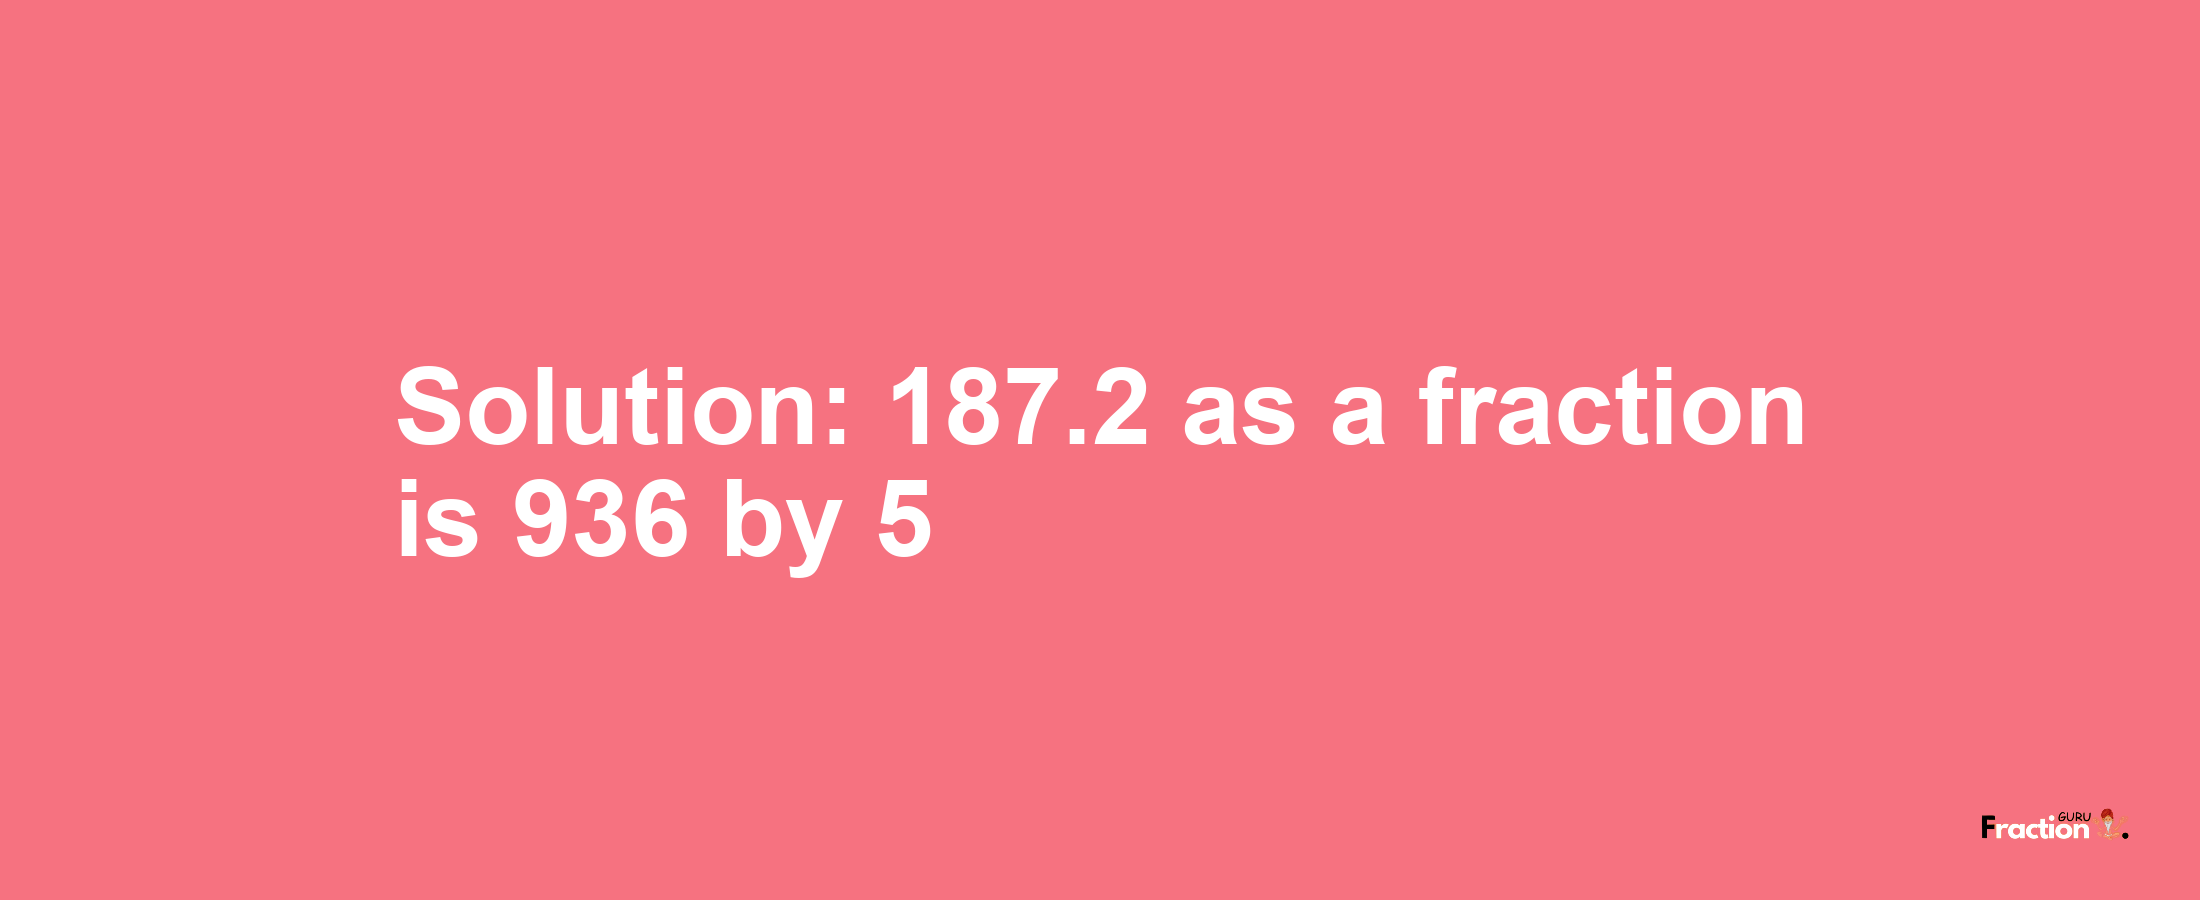 Solution:187.2 as a fraction is 936/5